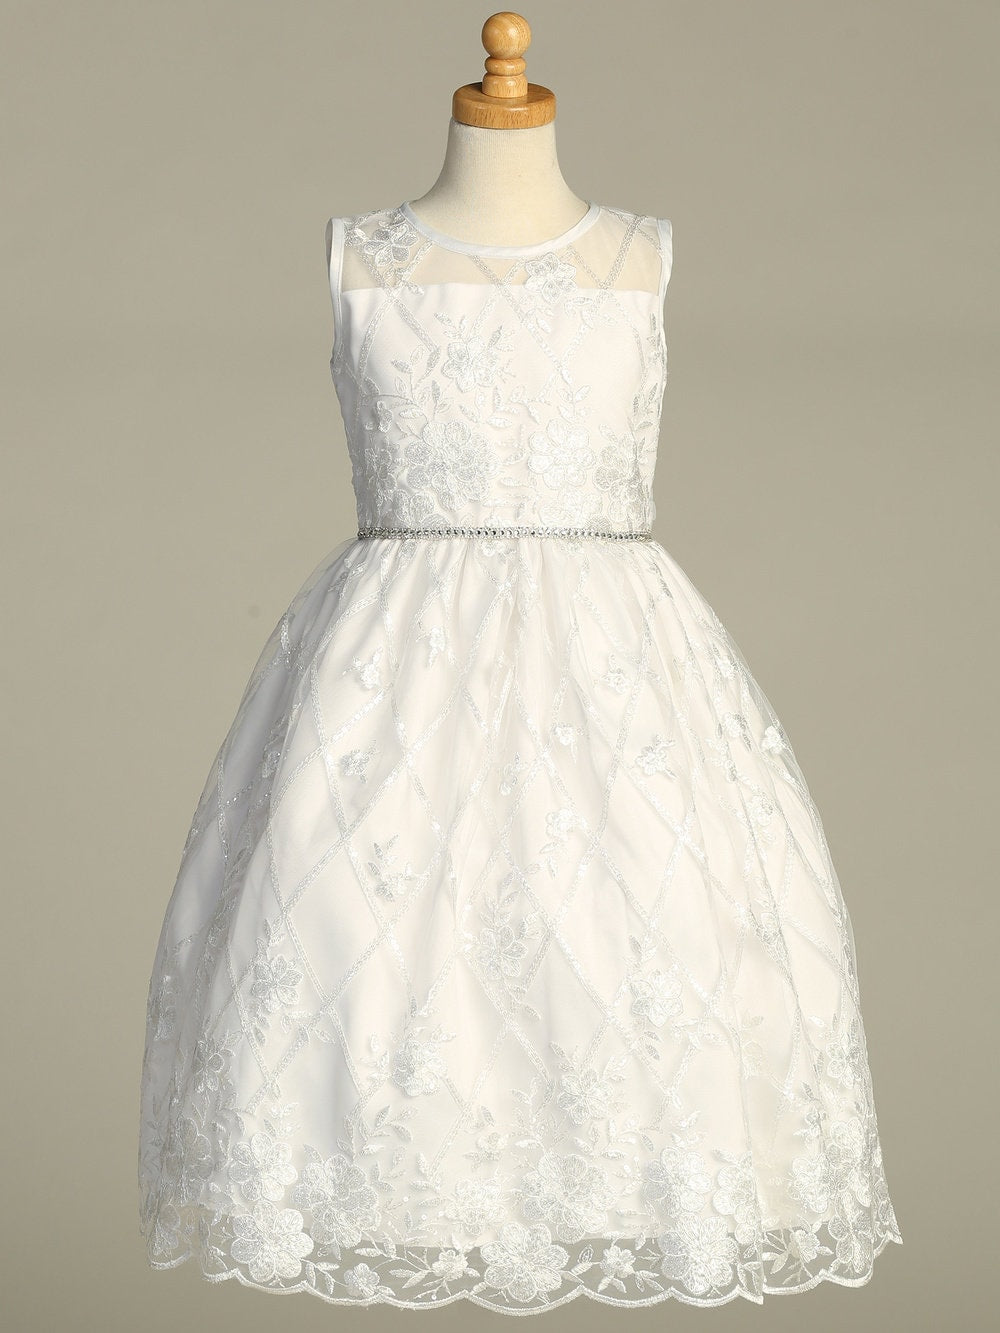 Back view of the First Communion Dress showing the zip fastening and bow tie at the back.